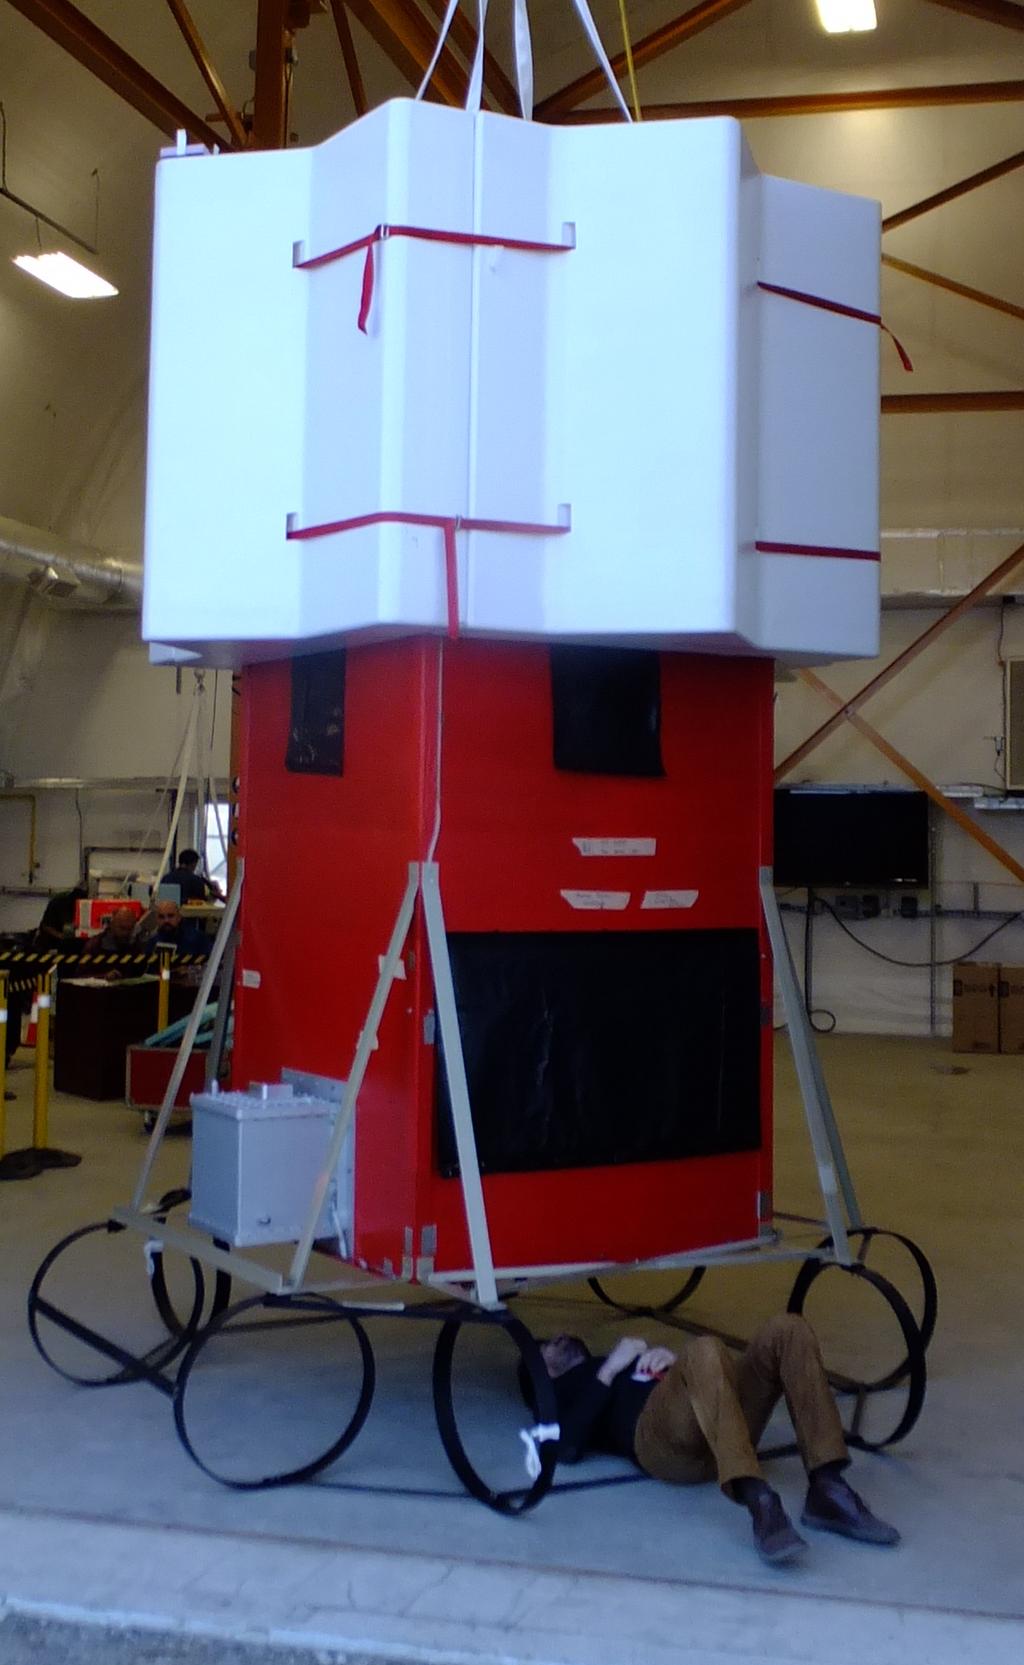 JEM-EUSO is a UV telescope that will observe Extremely Energetic Cosmic Rays (EECR) from the International Space Station (ISS) by measuring the UV light produced by EECR-induced extensive air